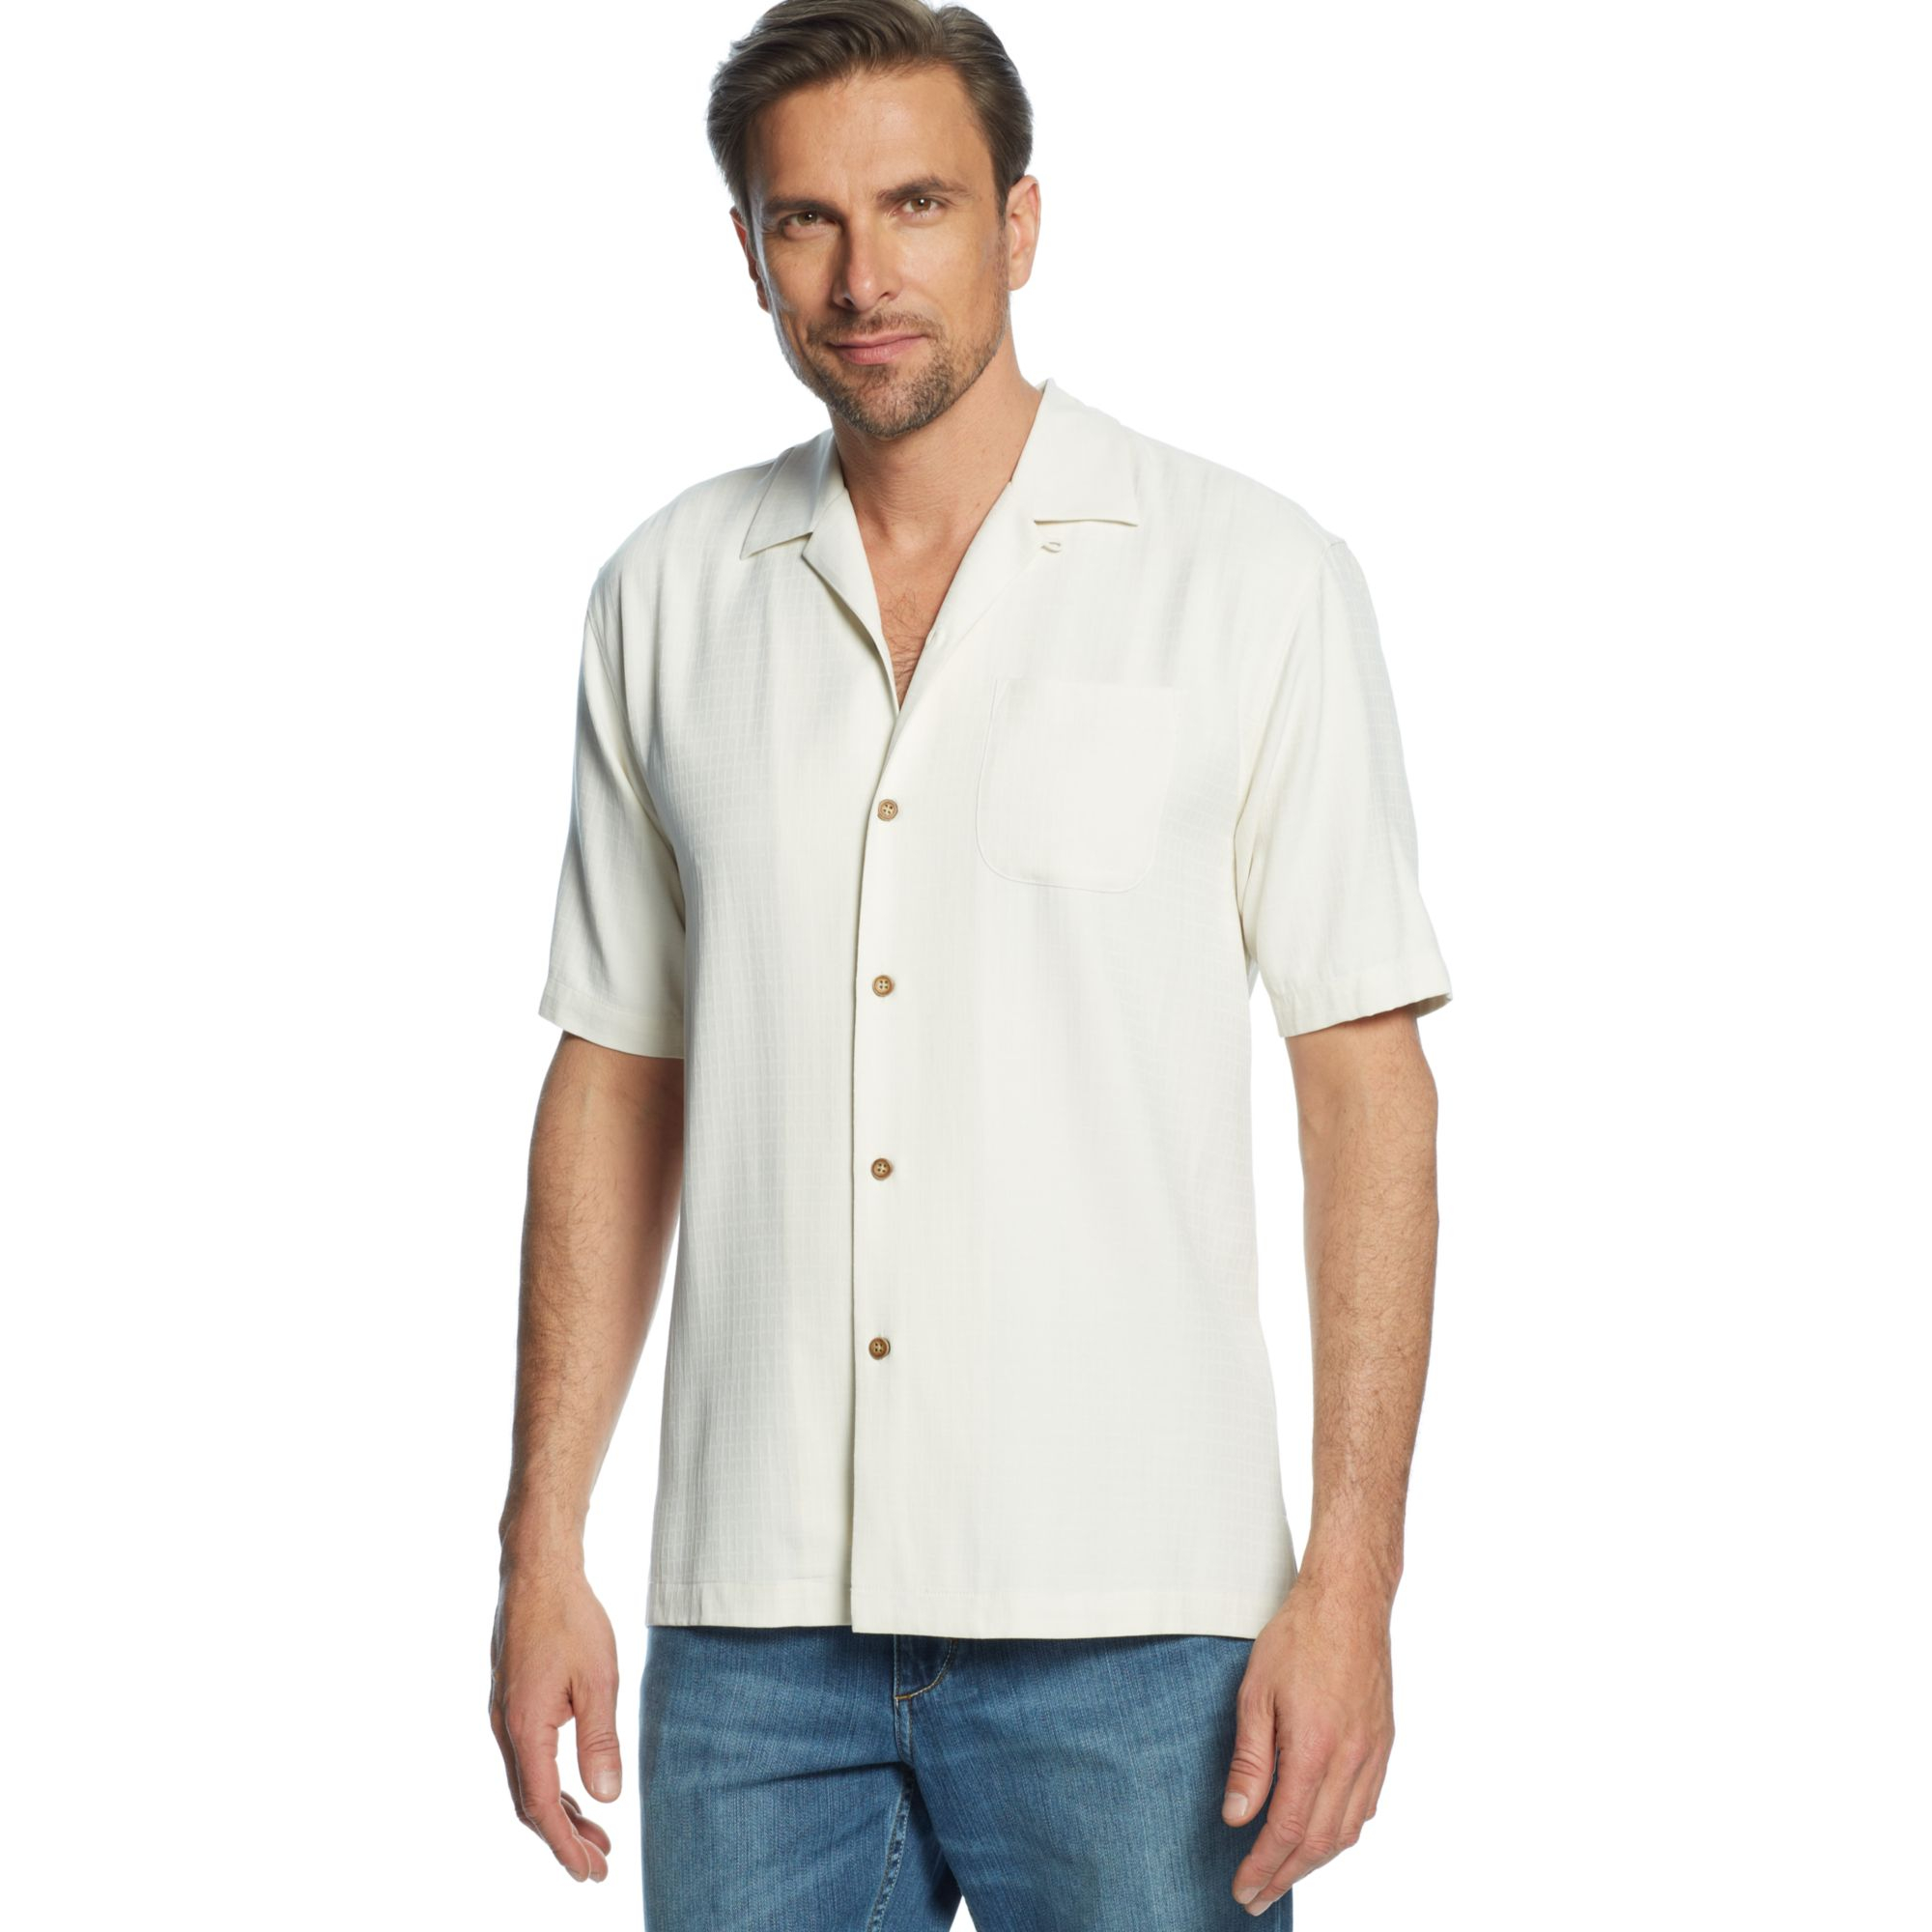 Lyst - Tommy bahama One Minute Workout Shirt in White for Men